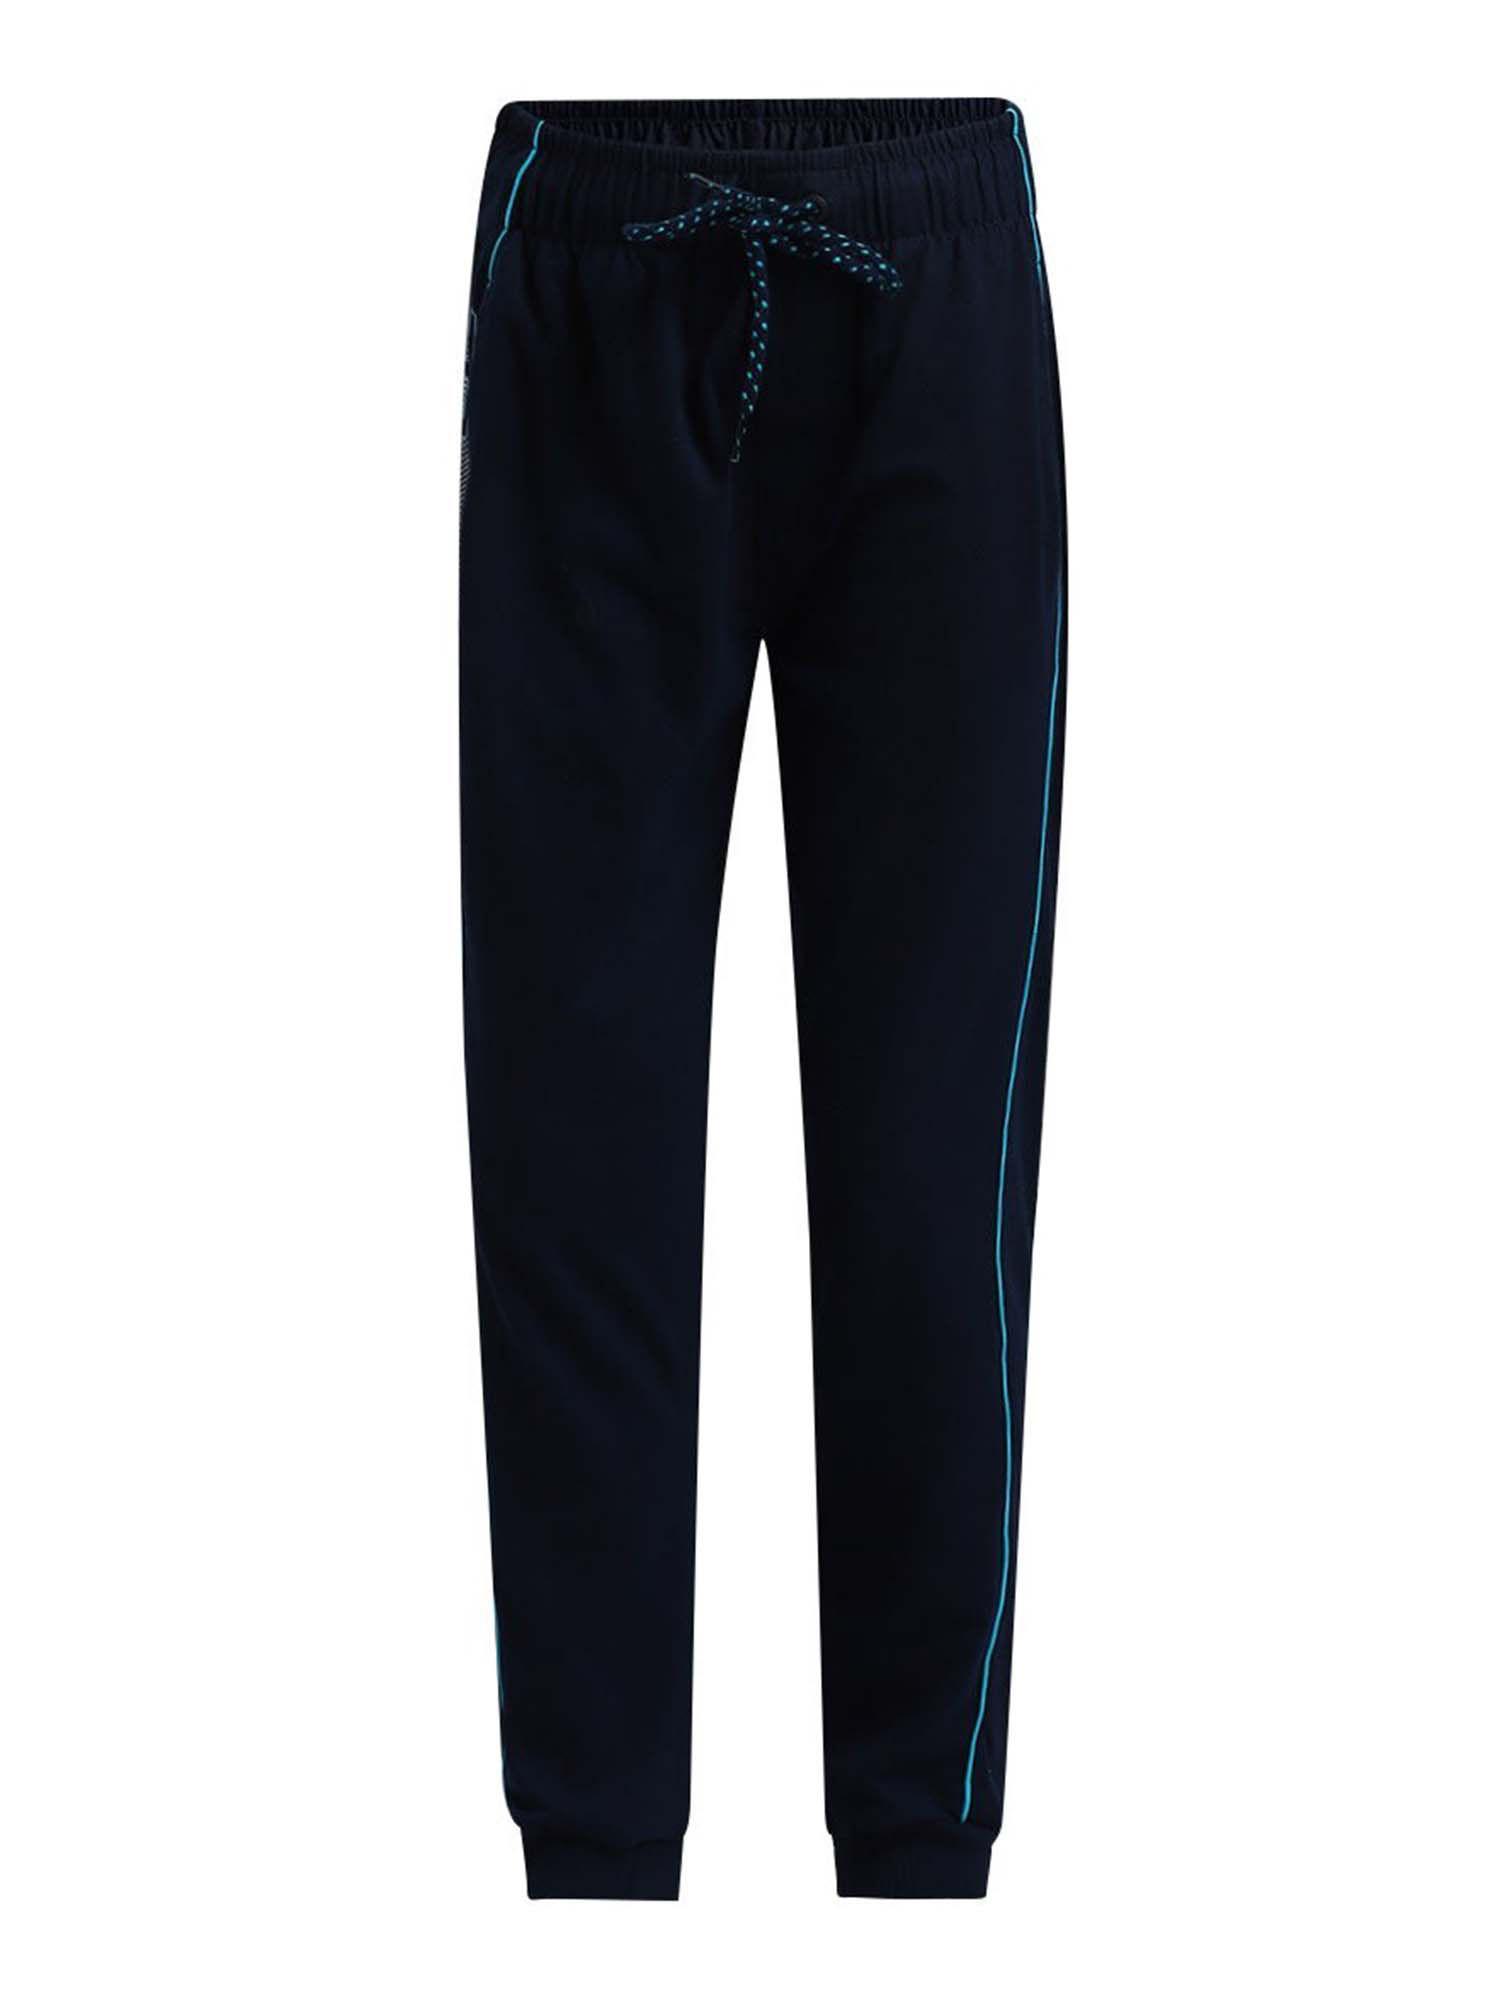 navy & scuba blue track pant - style number - (ab16)